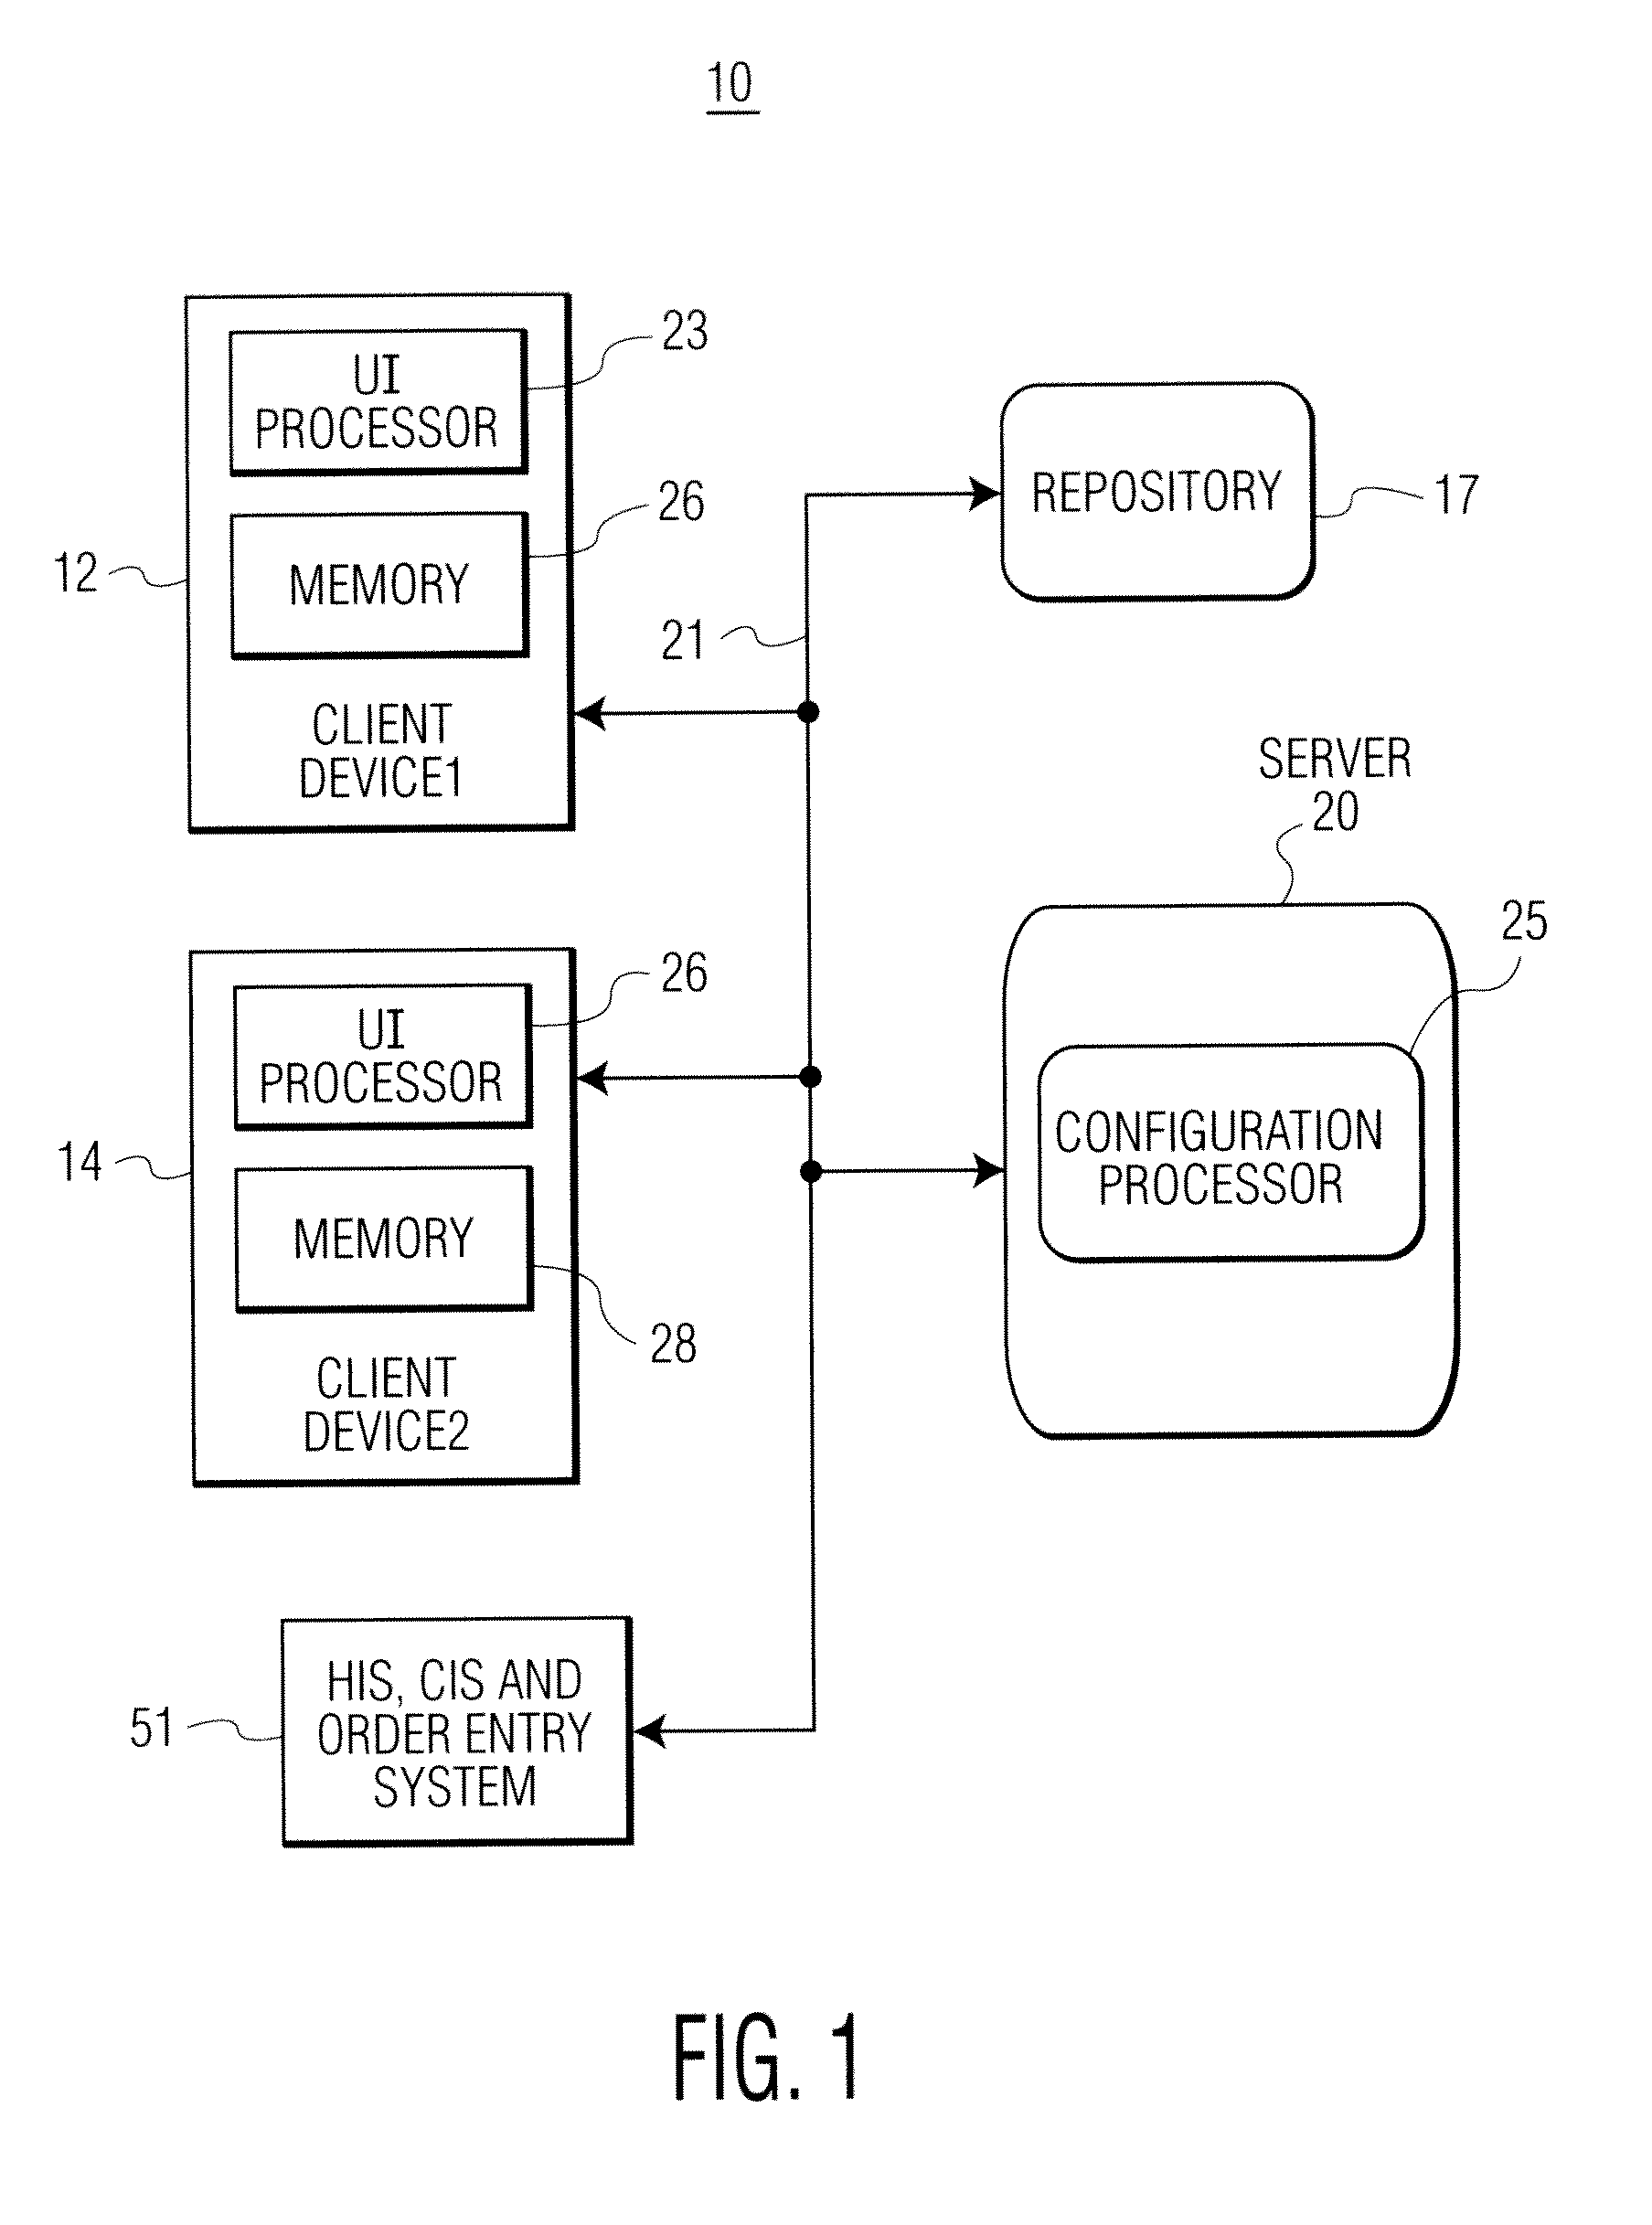 System and User Interface for Clinical Reporting and Ordering Provision of an Item